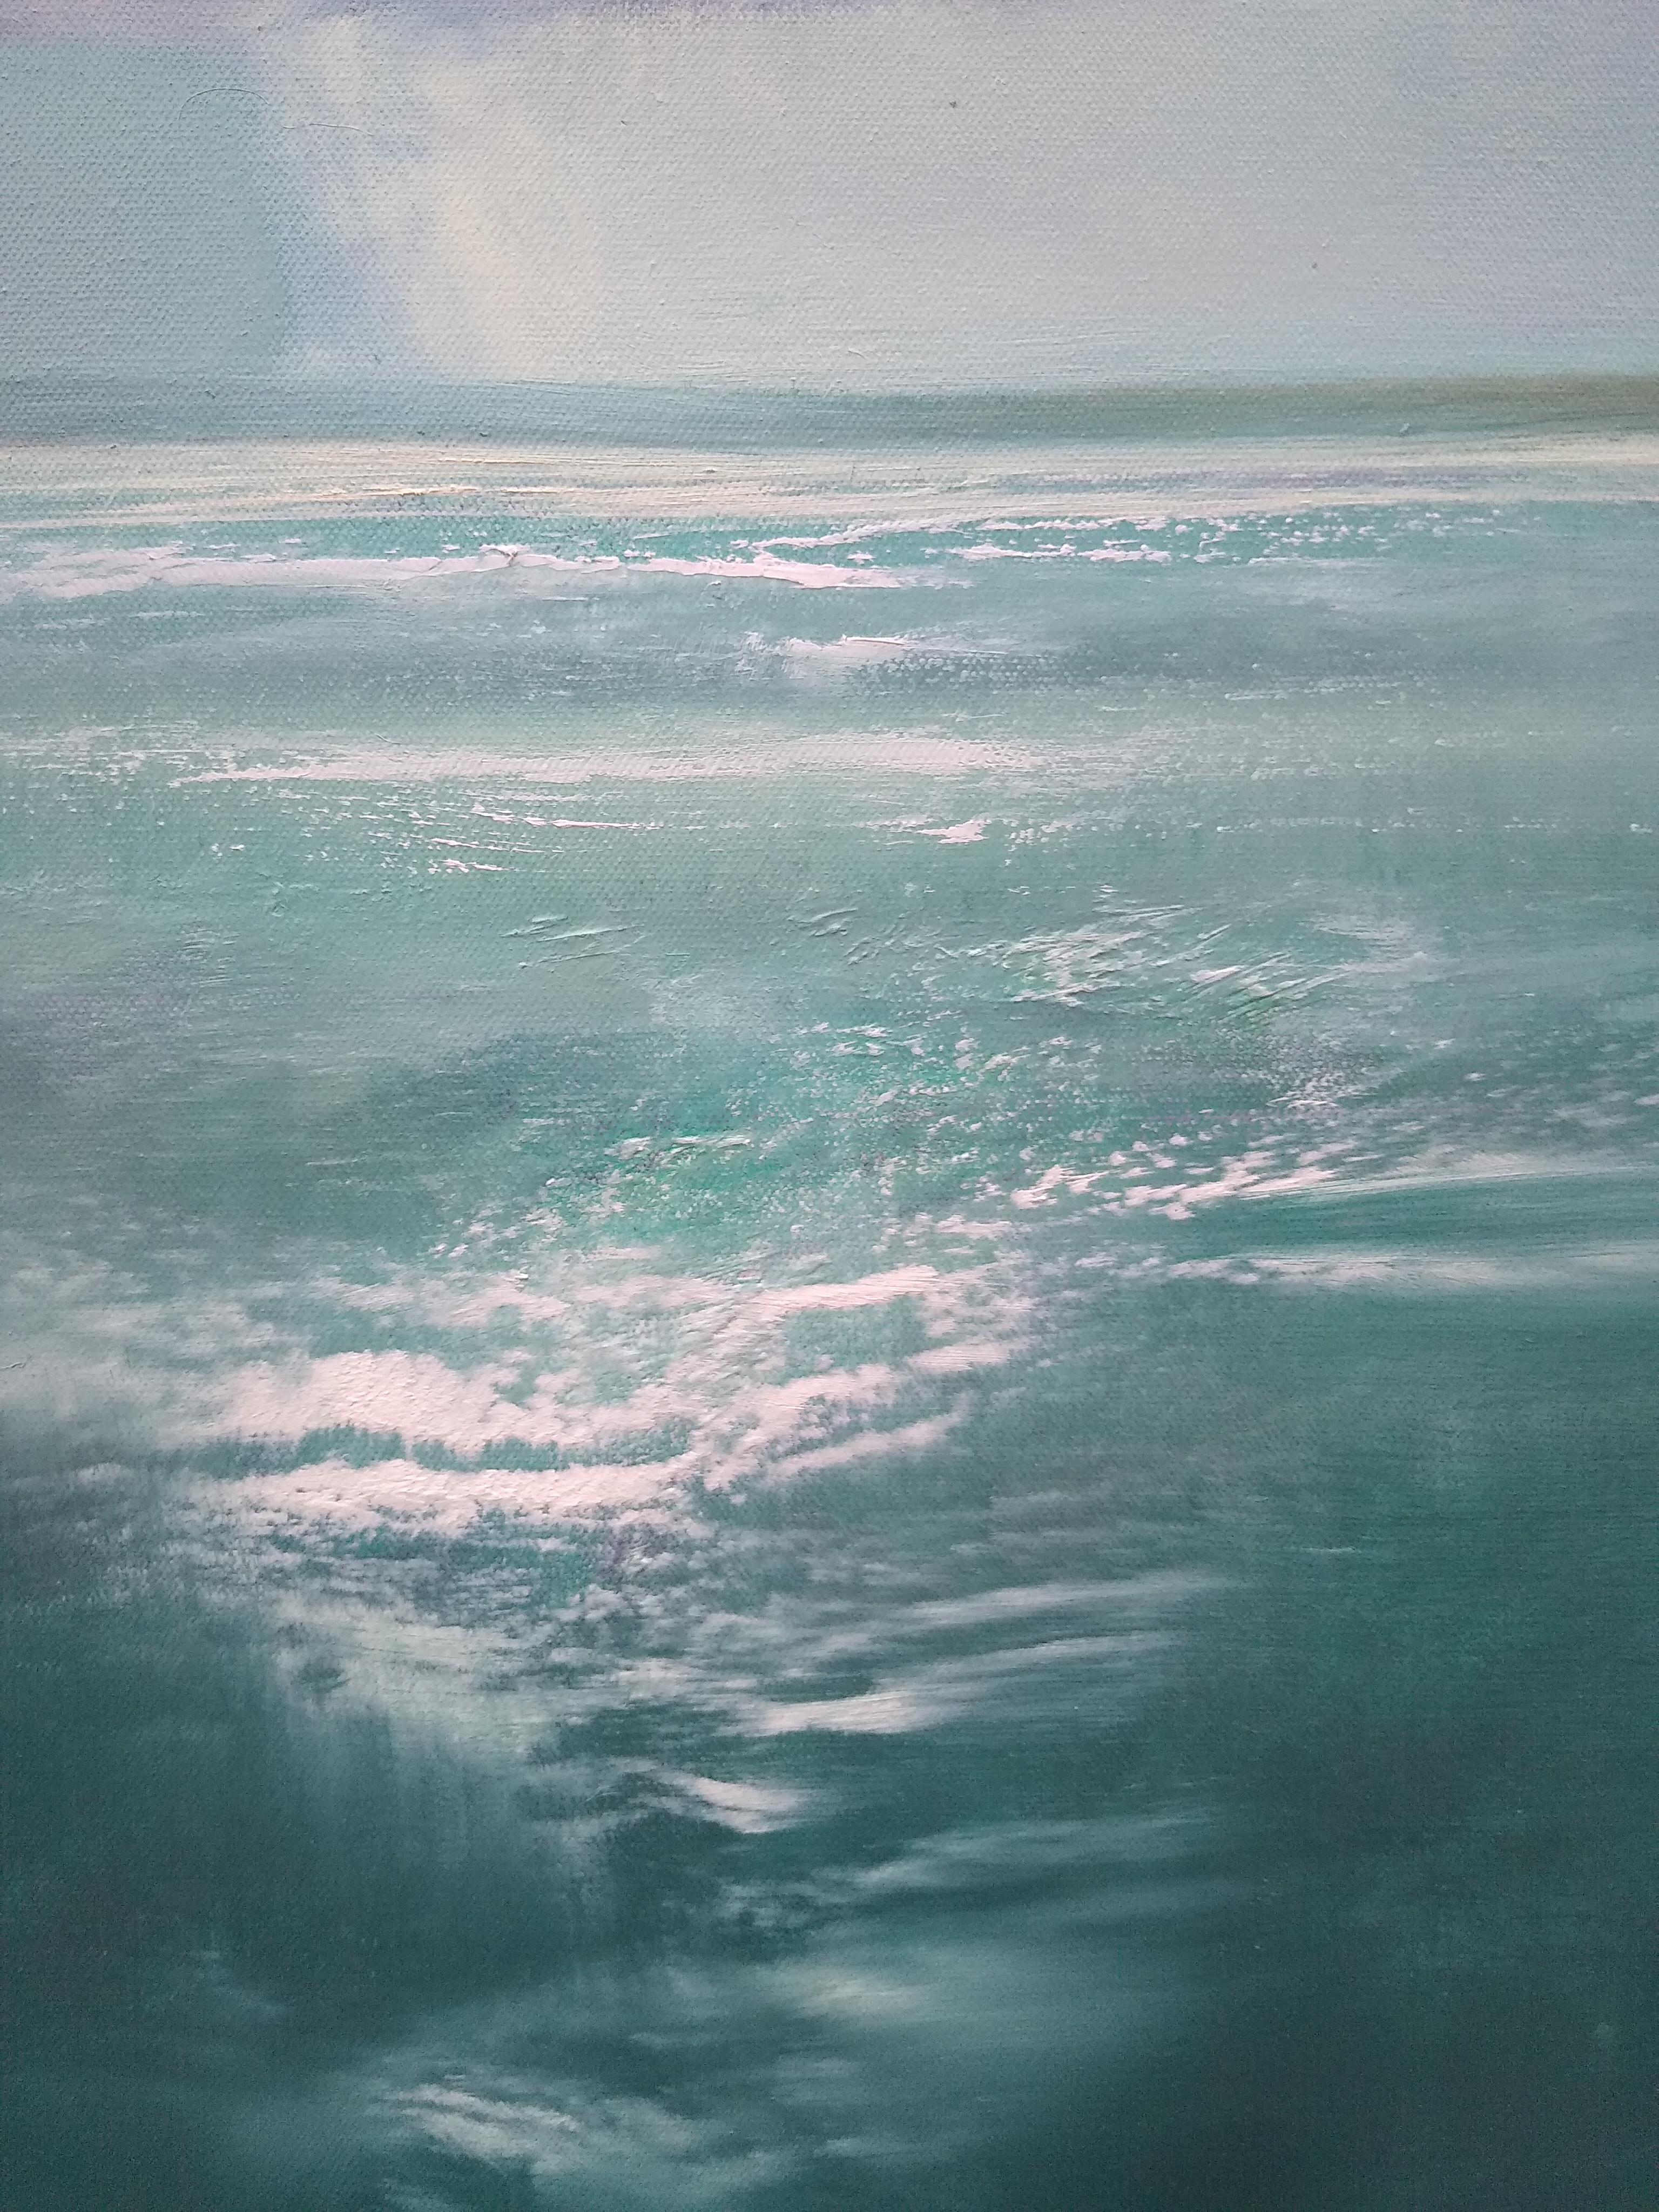 <p>Artist Comments<br>A delicate cloud gently meanders along the horizon in artist George Peebles' ethereal seascape. He displays a striking view of the majestic ocean in a rare moment of calm. The brilliant turquoise hues embody an impression of a